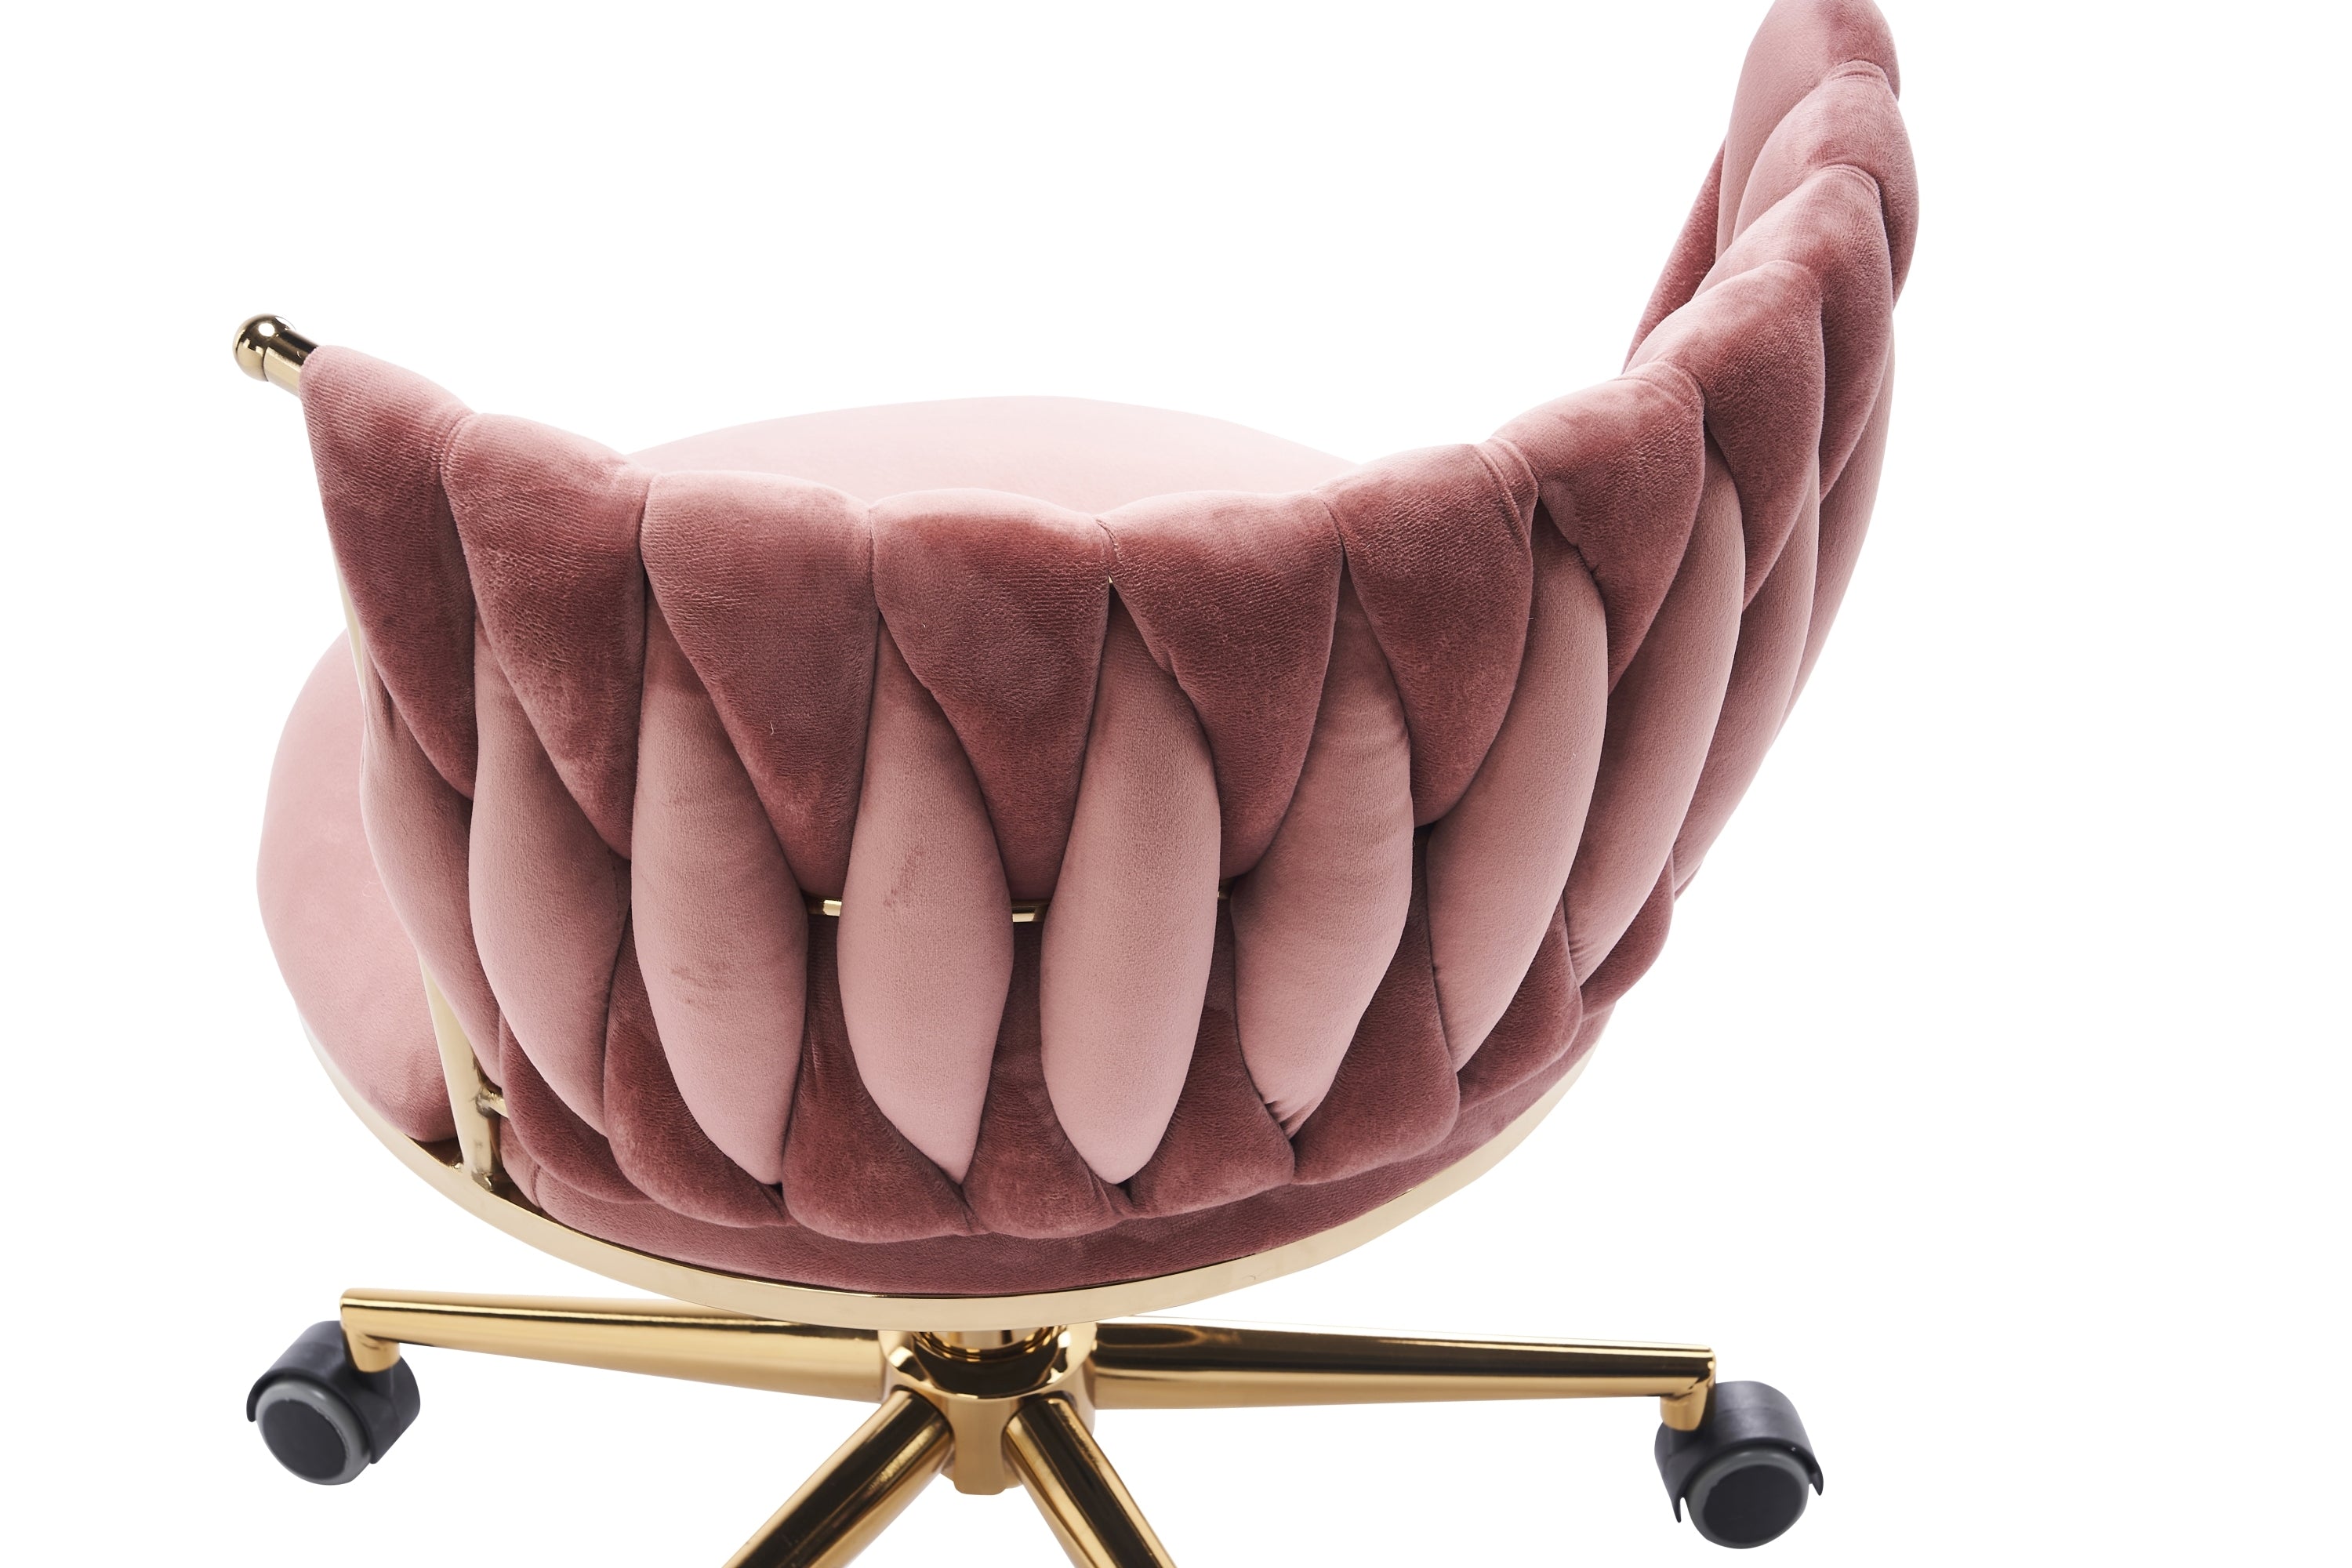 Upholstered Home Office Desk Chairs with Adjustable Swivel Wheels - Pink